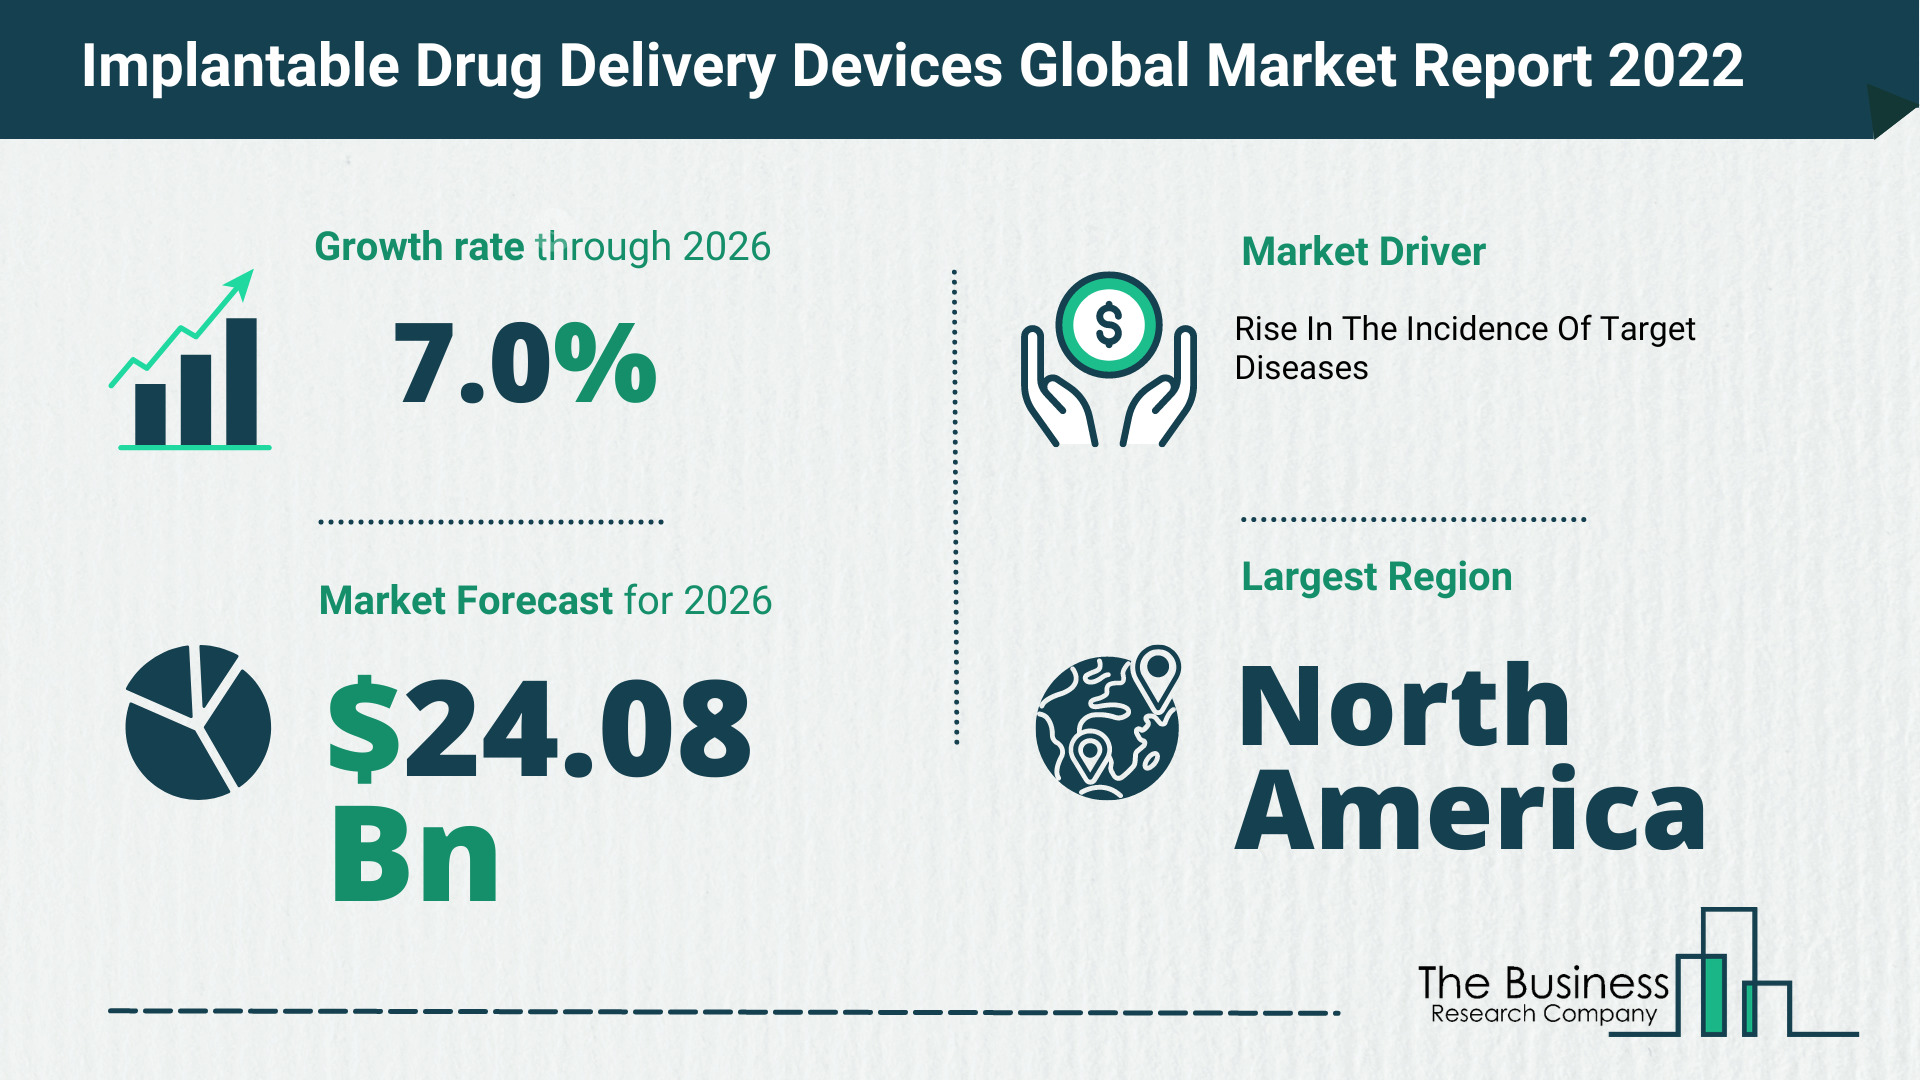 Latest Implantable Drug Delivery Devices Market Growth Study 2022-2026 By The Business Research Company